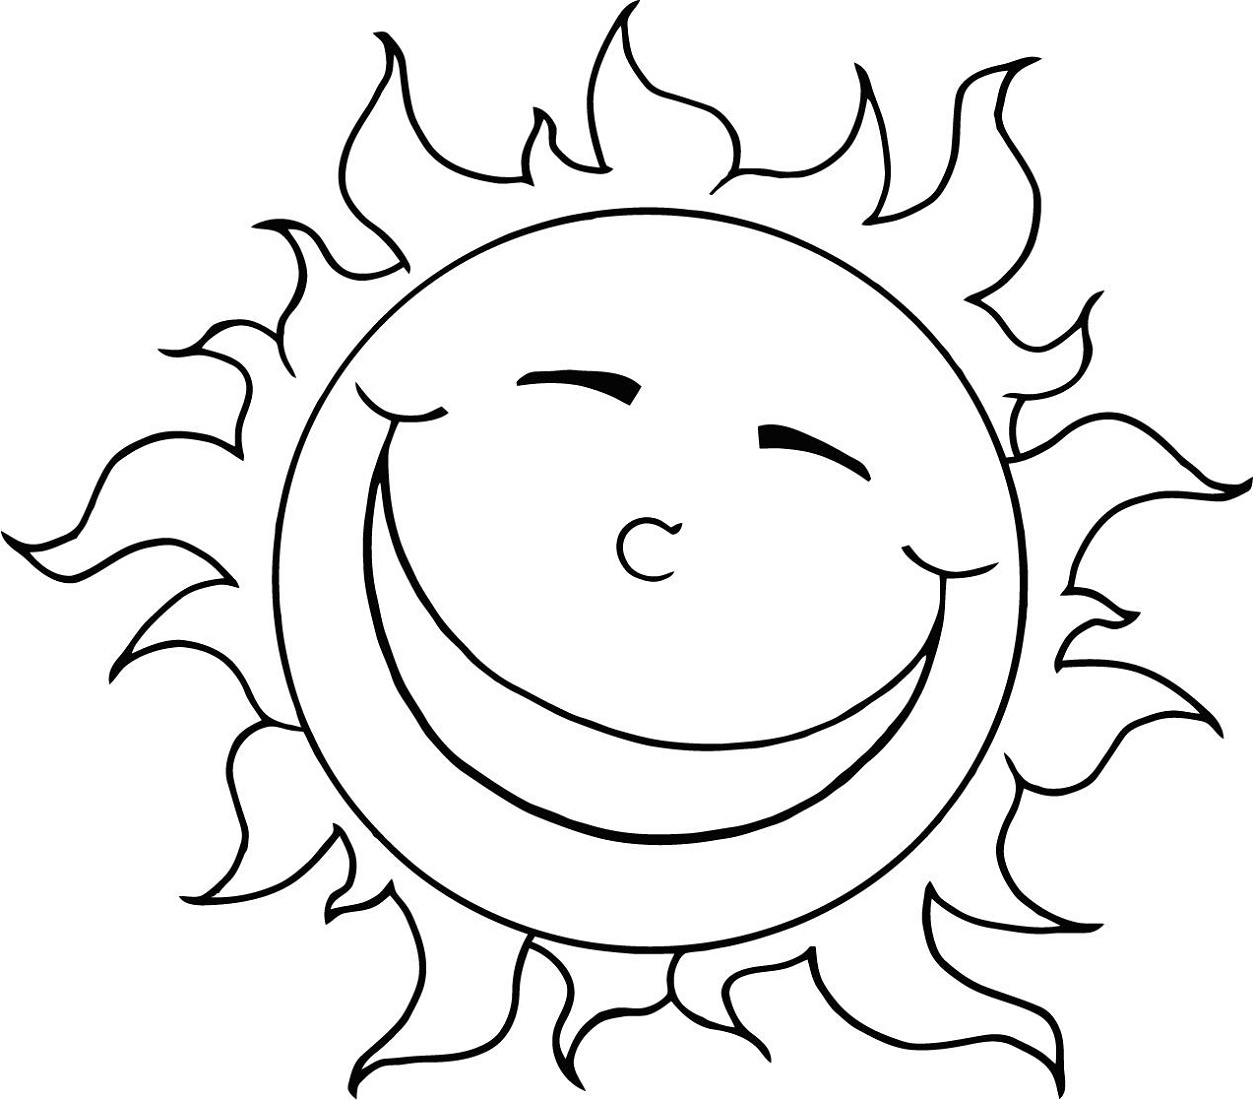 Sun Coloring Page For Kids